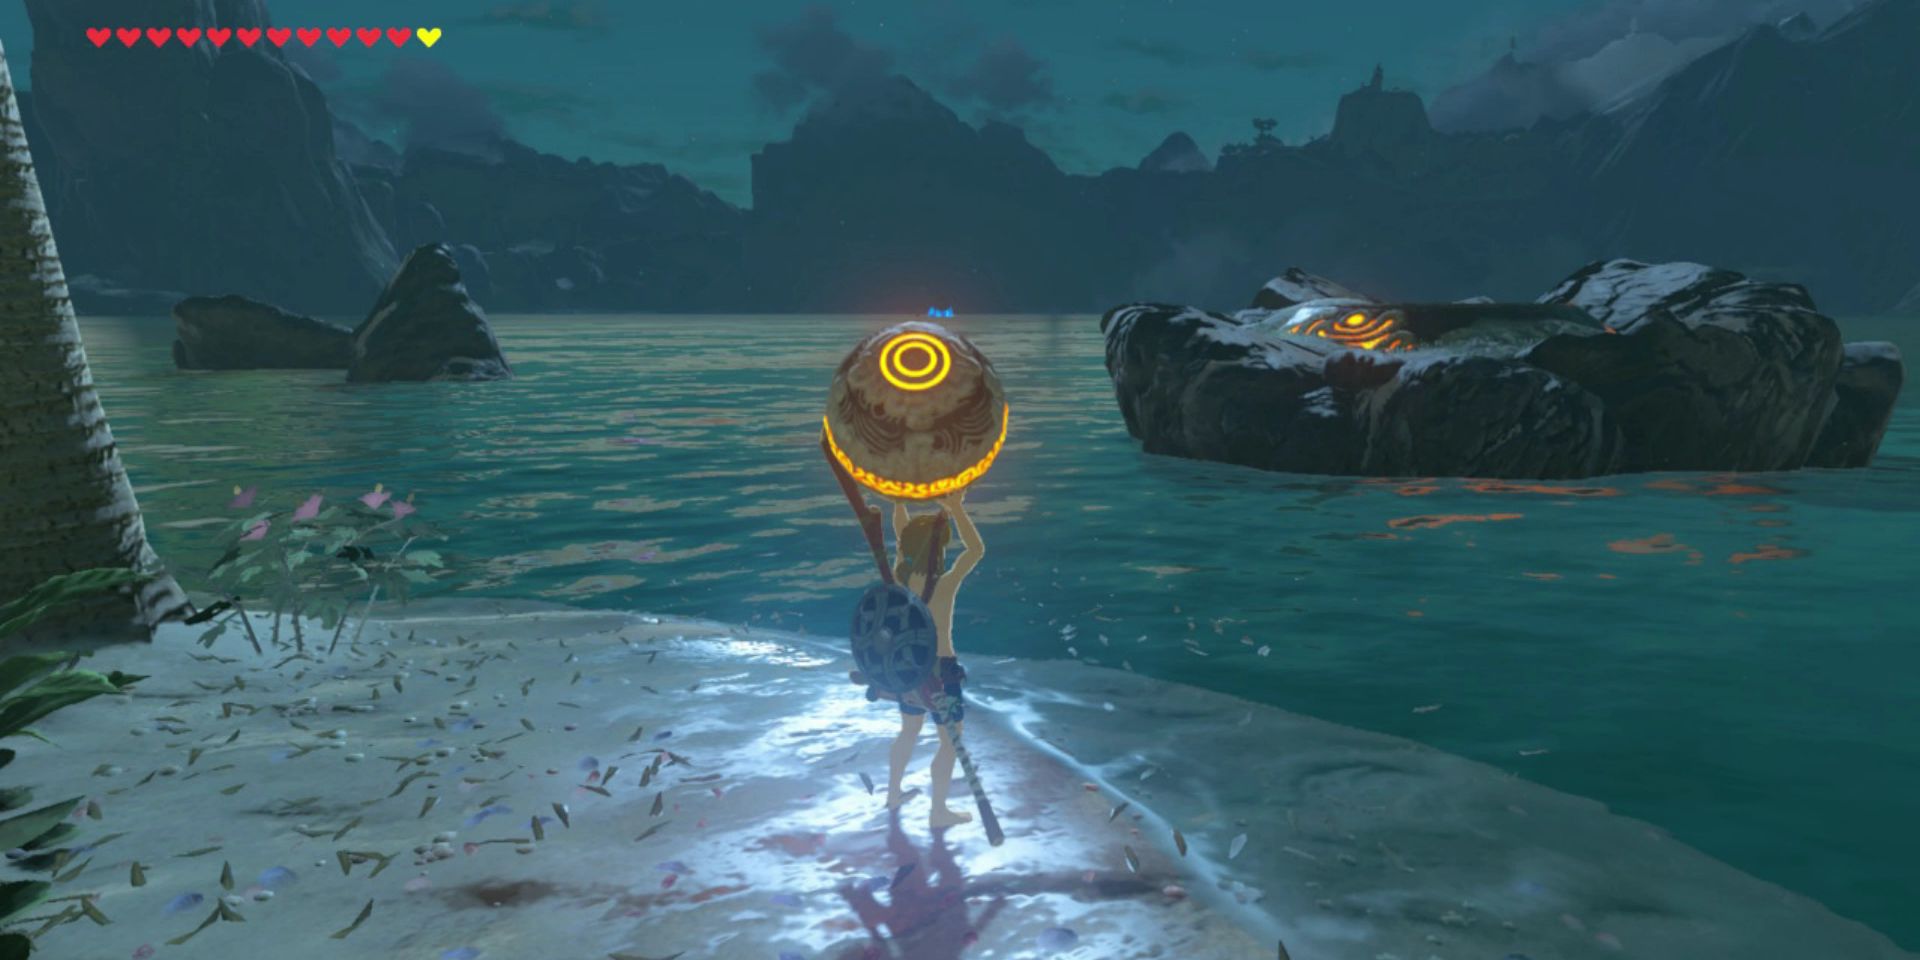 BotW players can start with weapons on Eventide. 